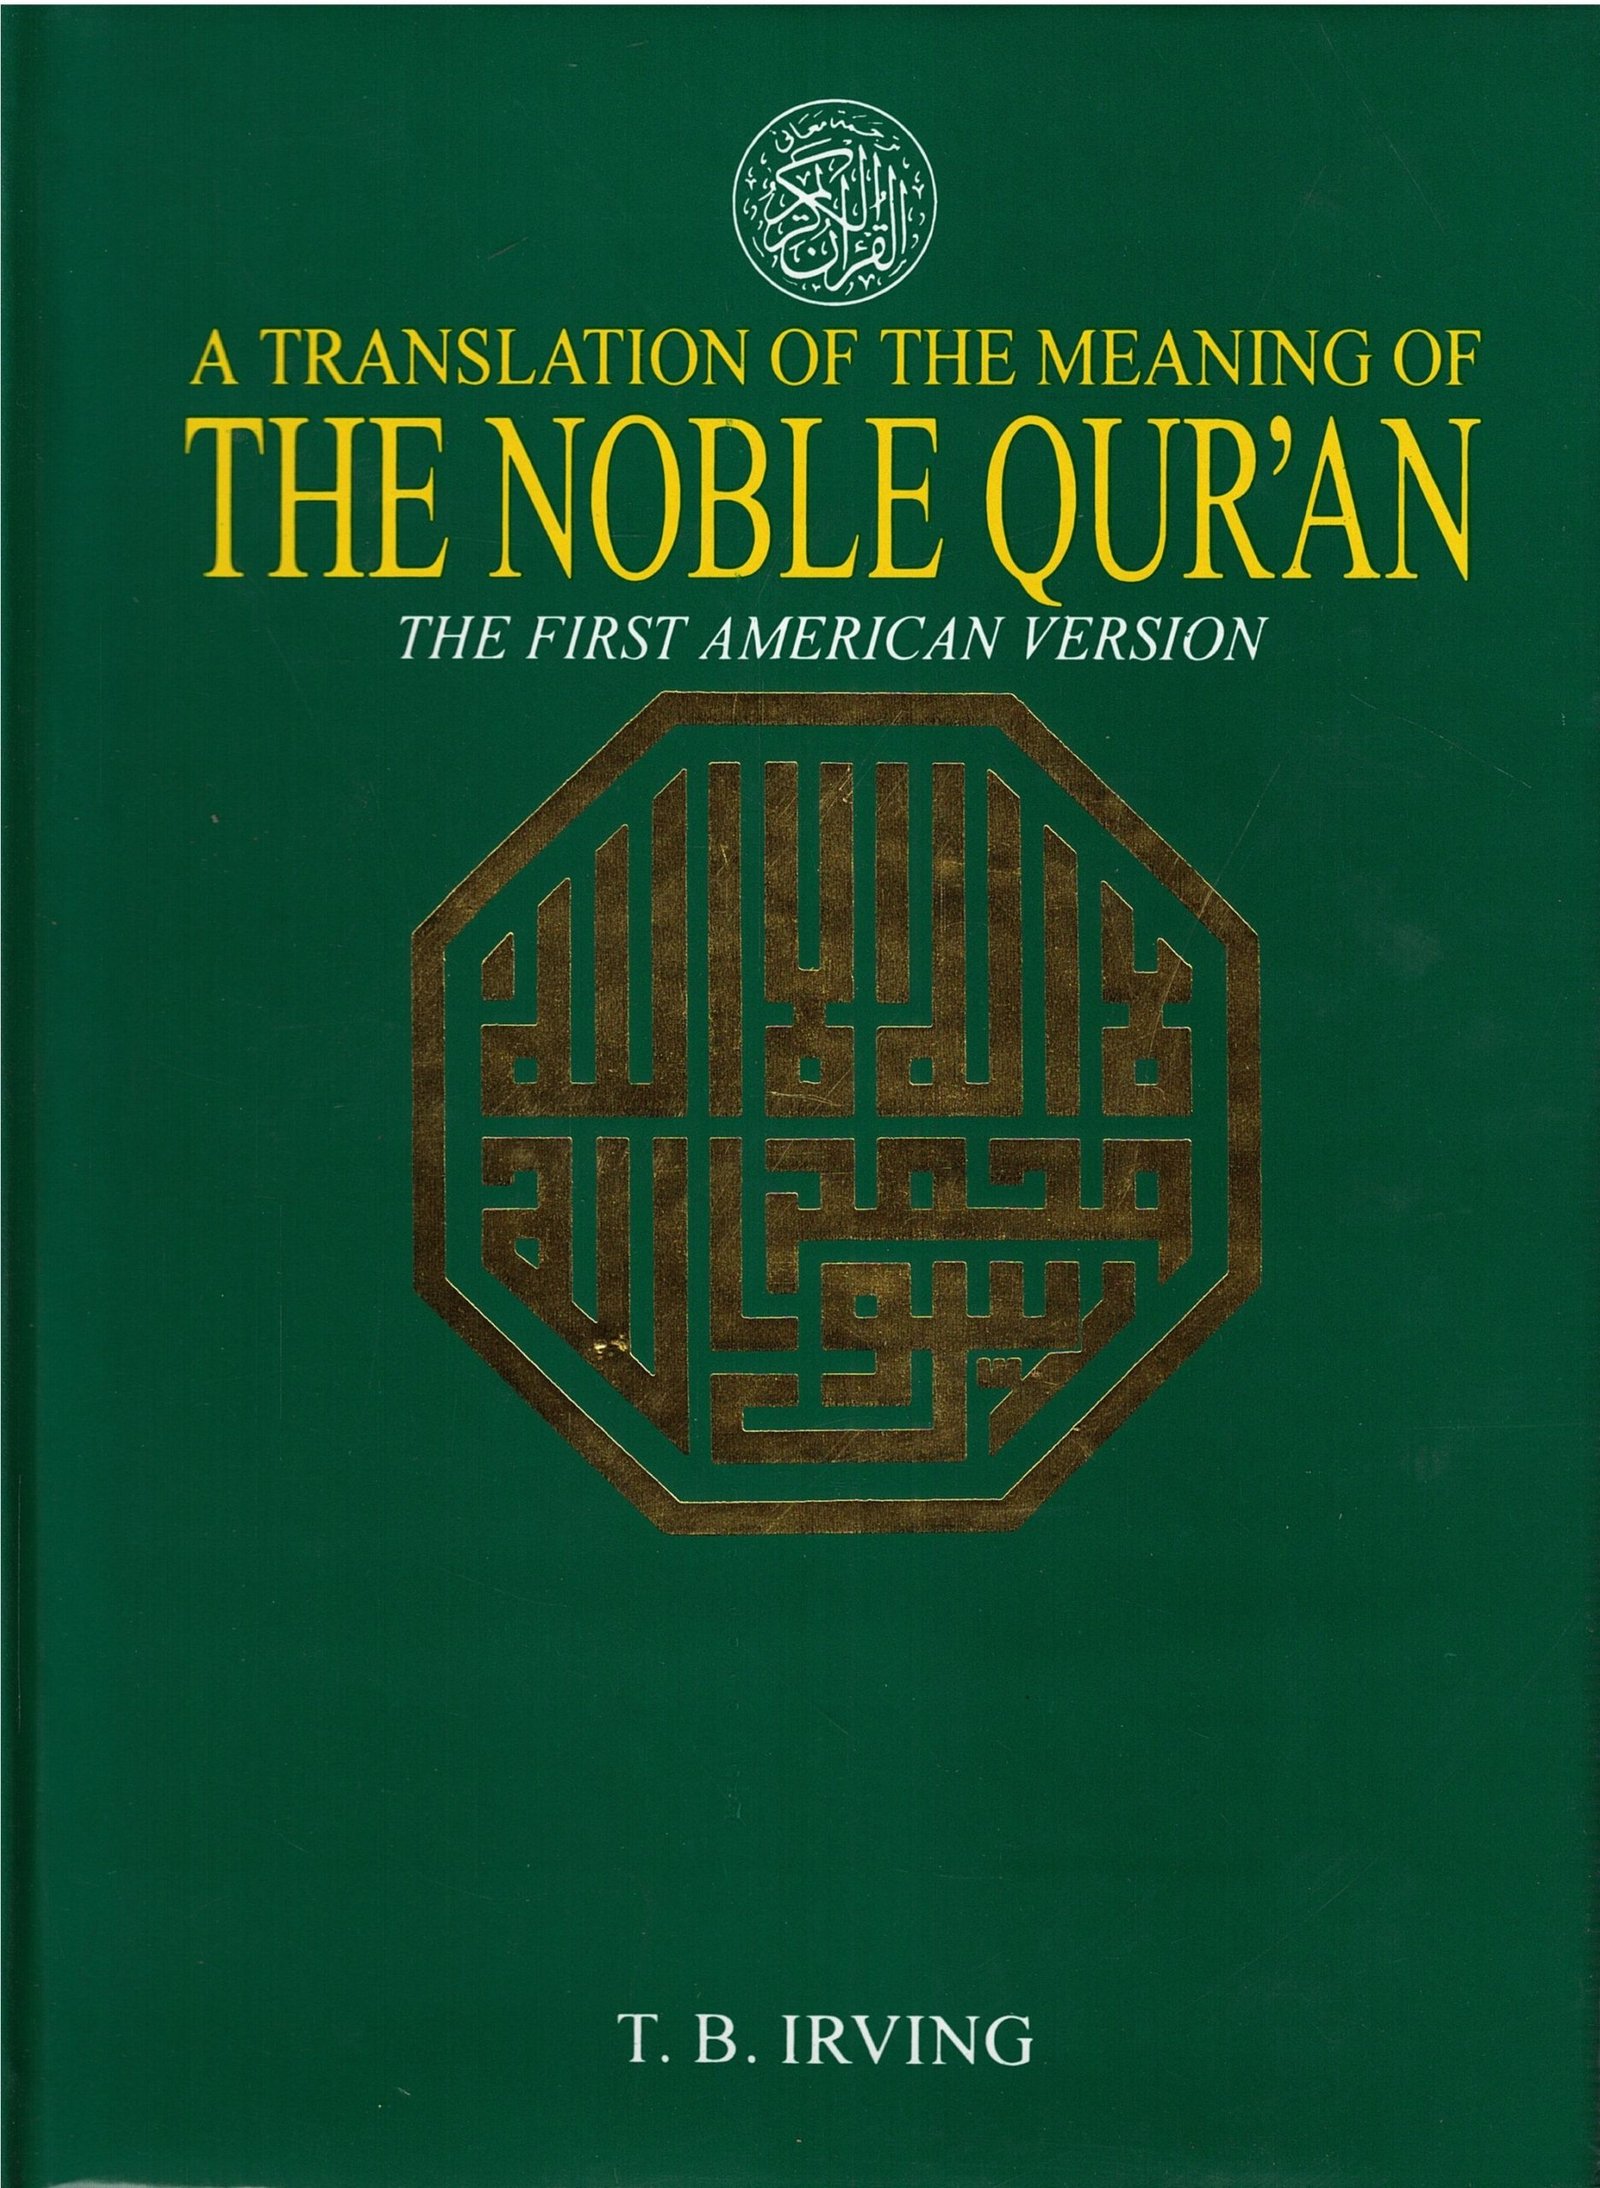 A Translation of the Meaning of The Noble Qur'an